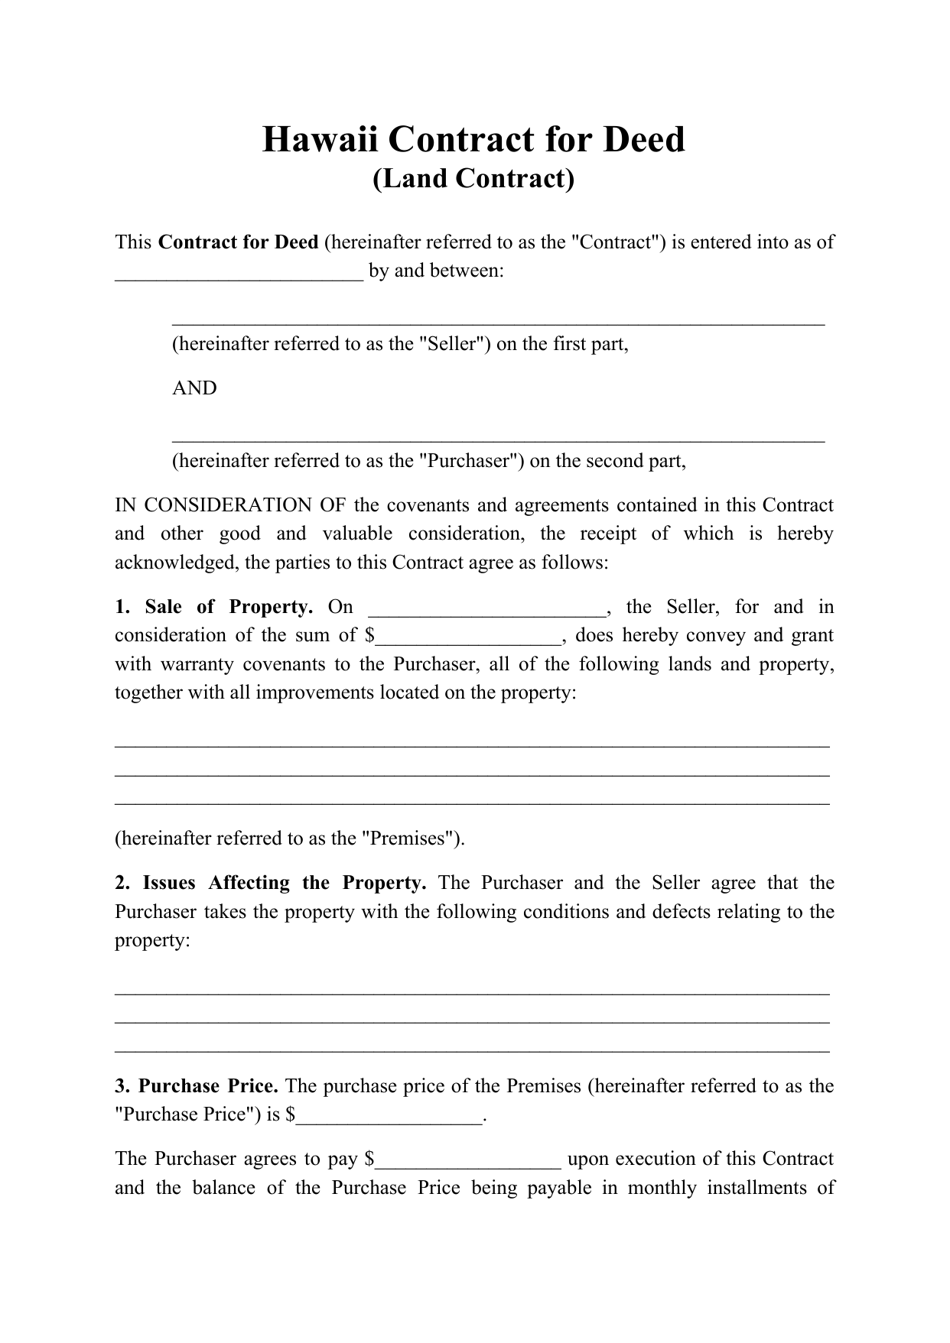 Contract for Deed (Land Contract) - Hawaii, Page 1